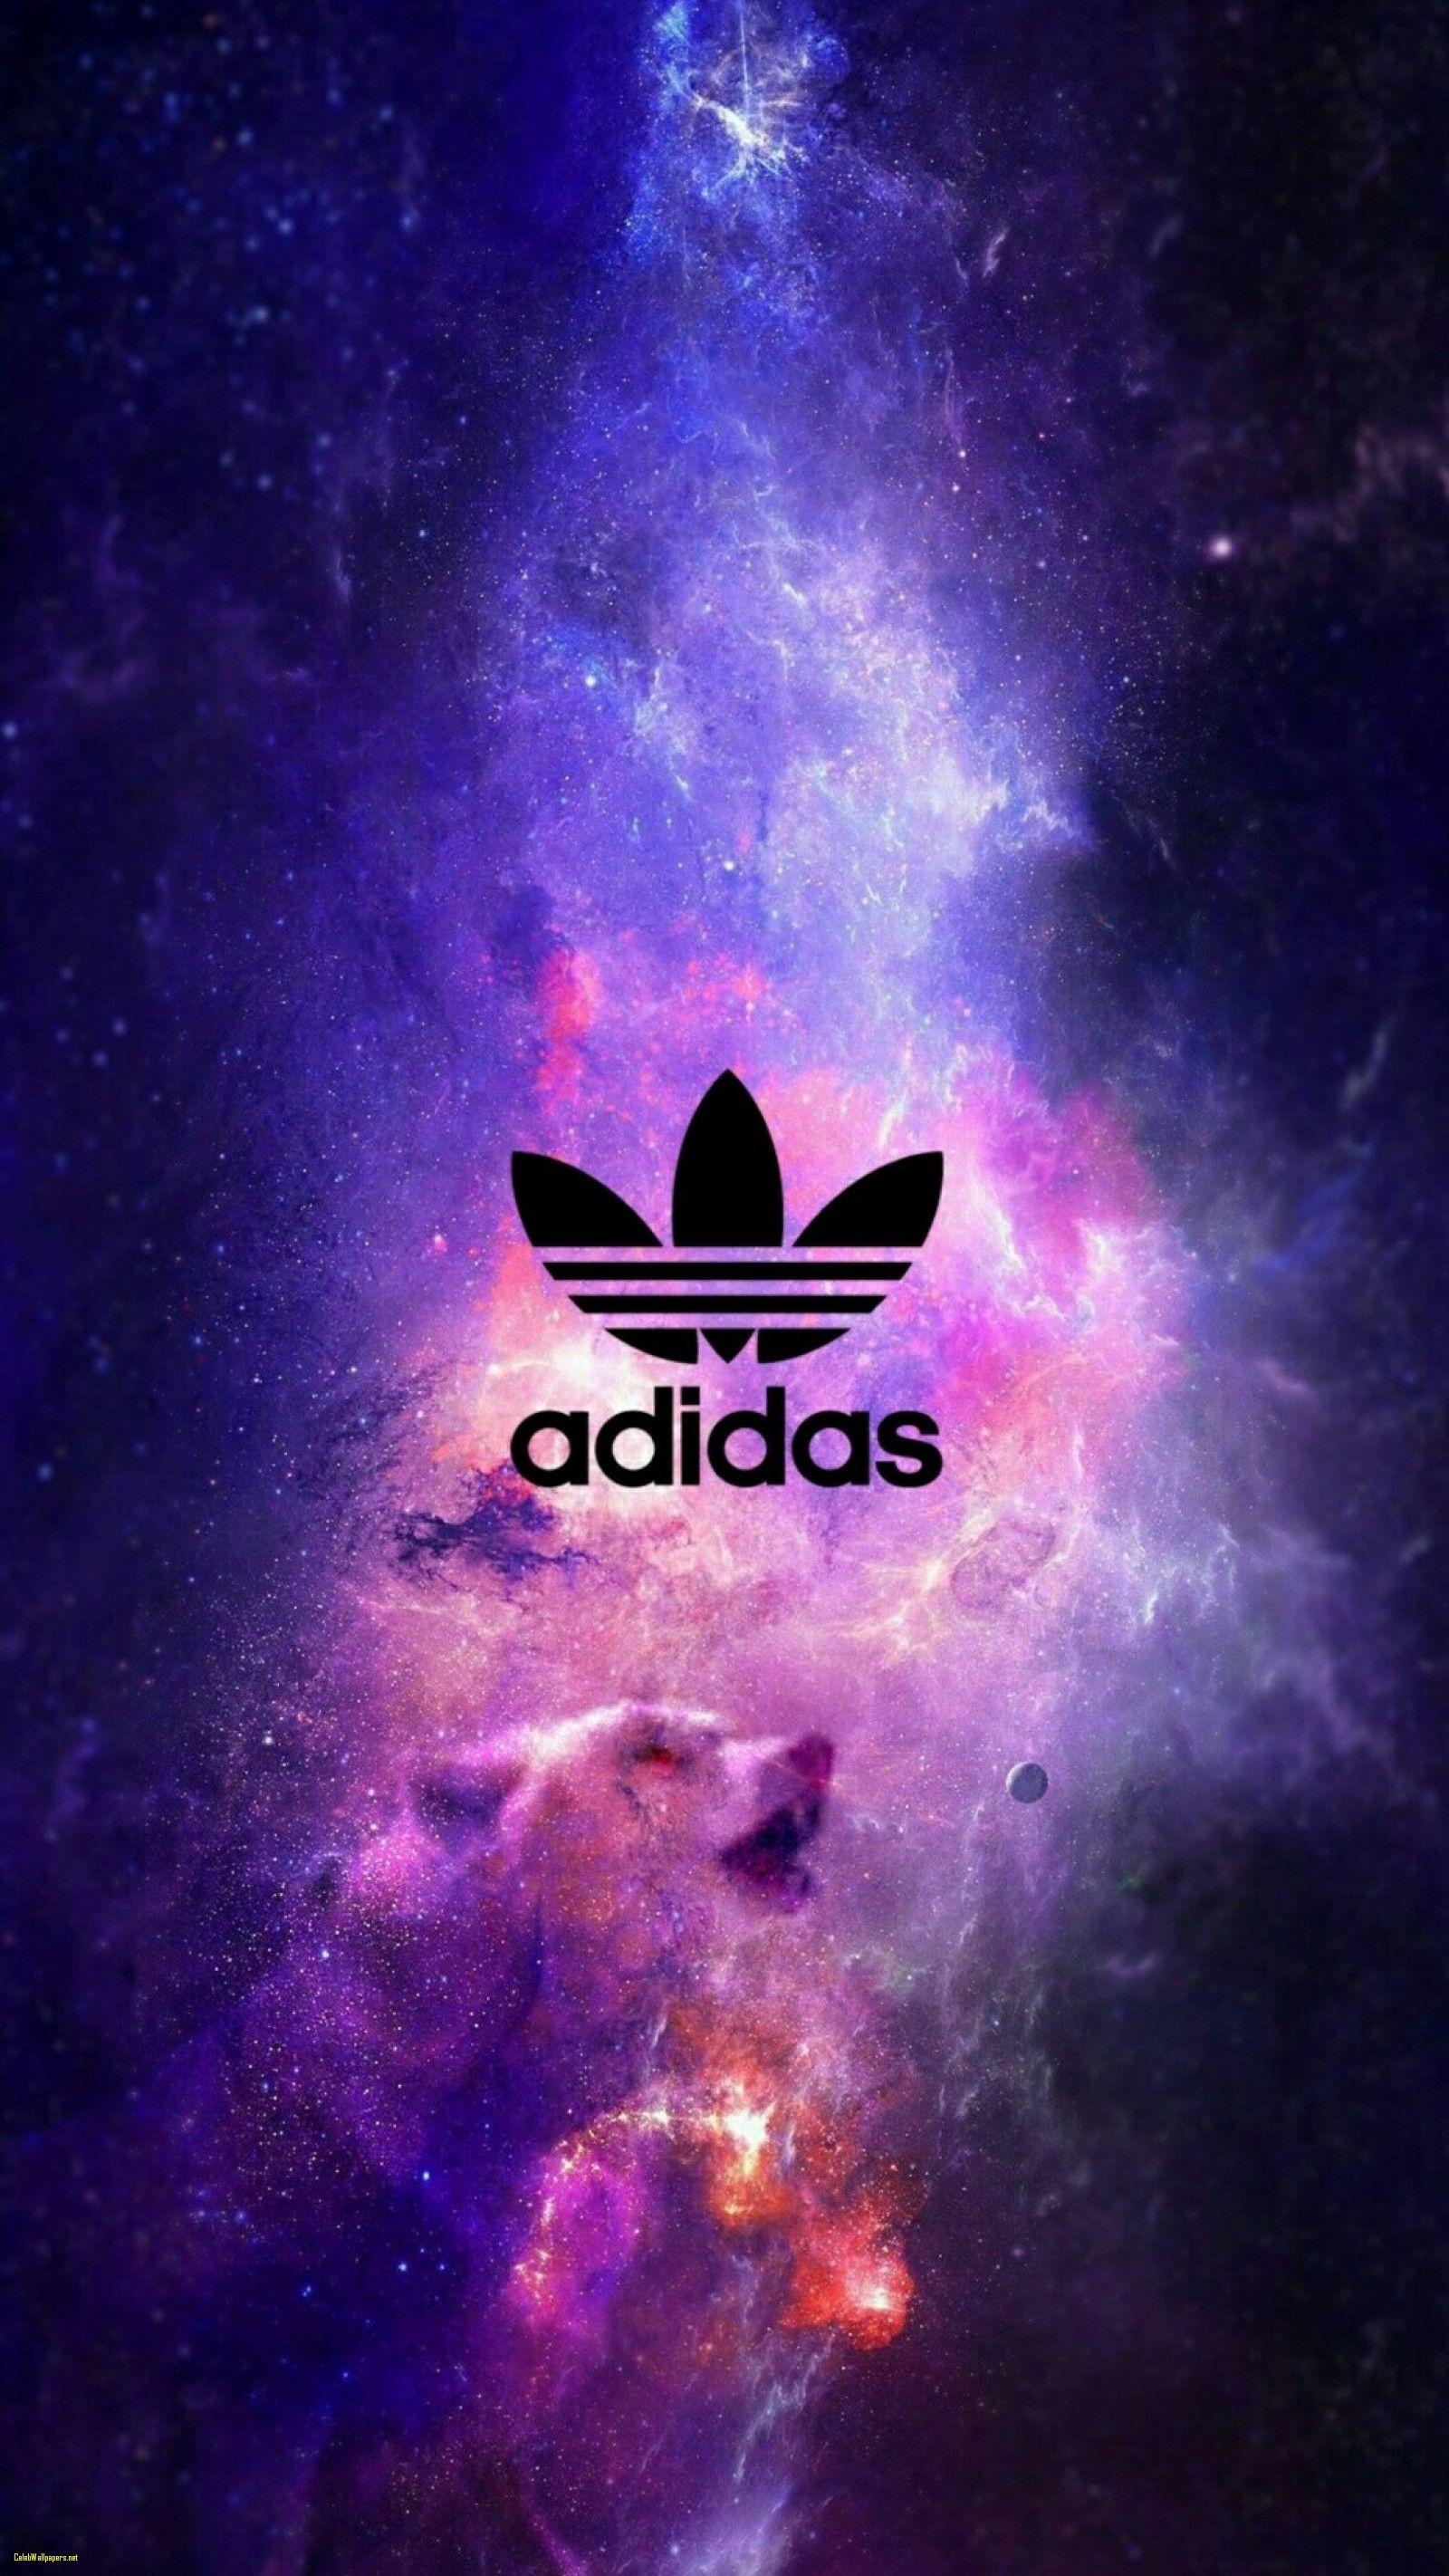 View Adidas Wallpaper Iphone 7 Pictures